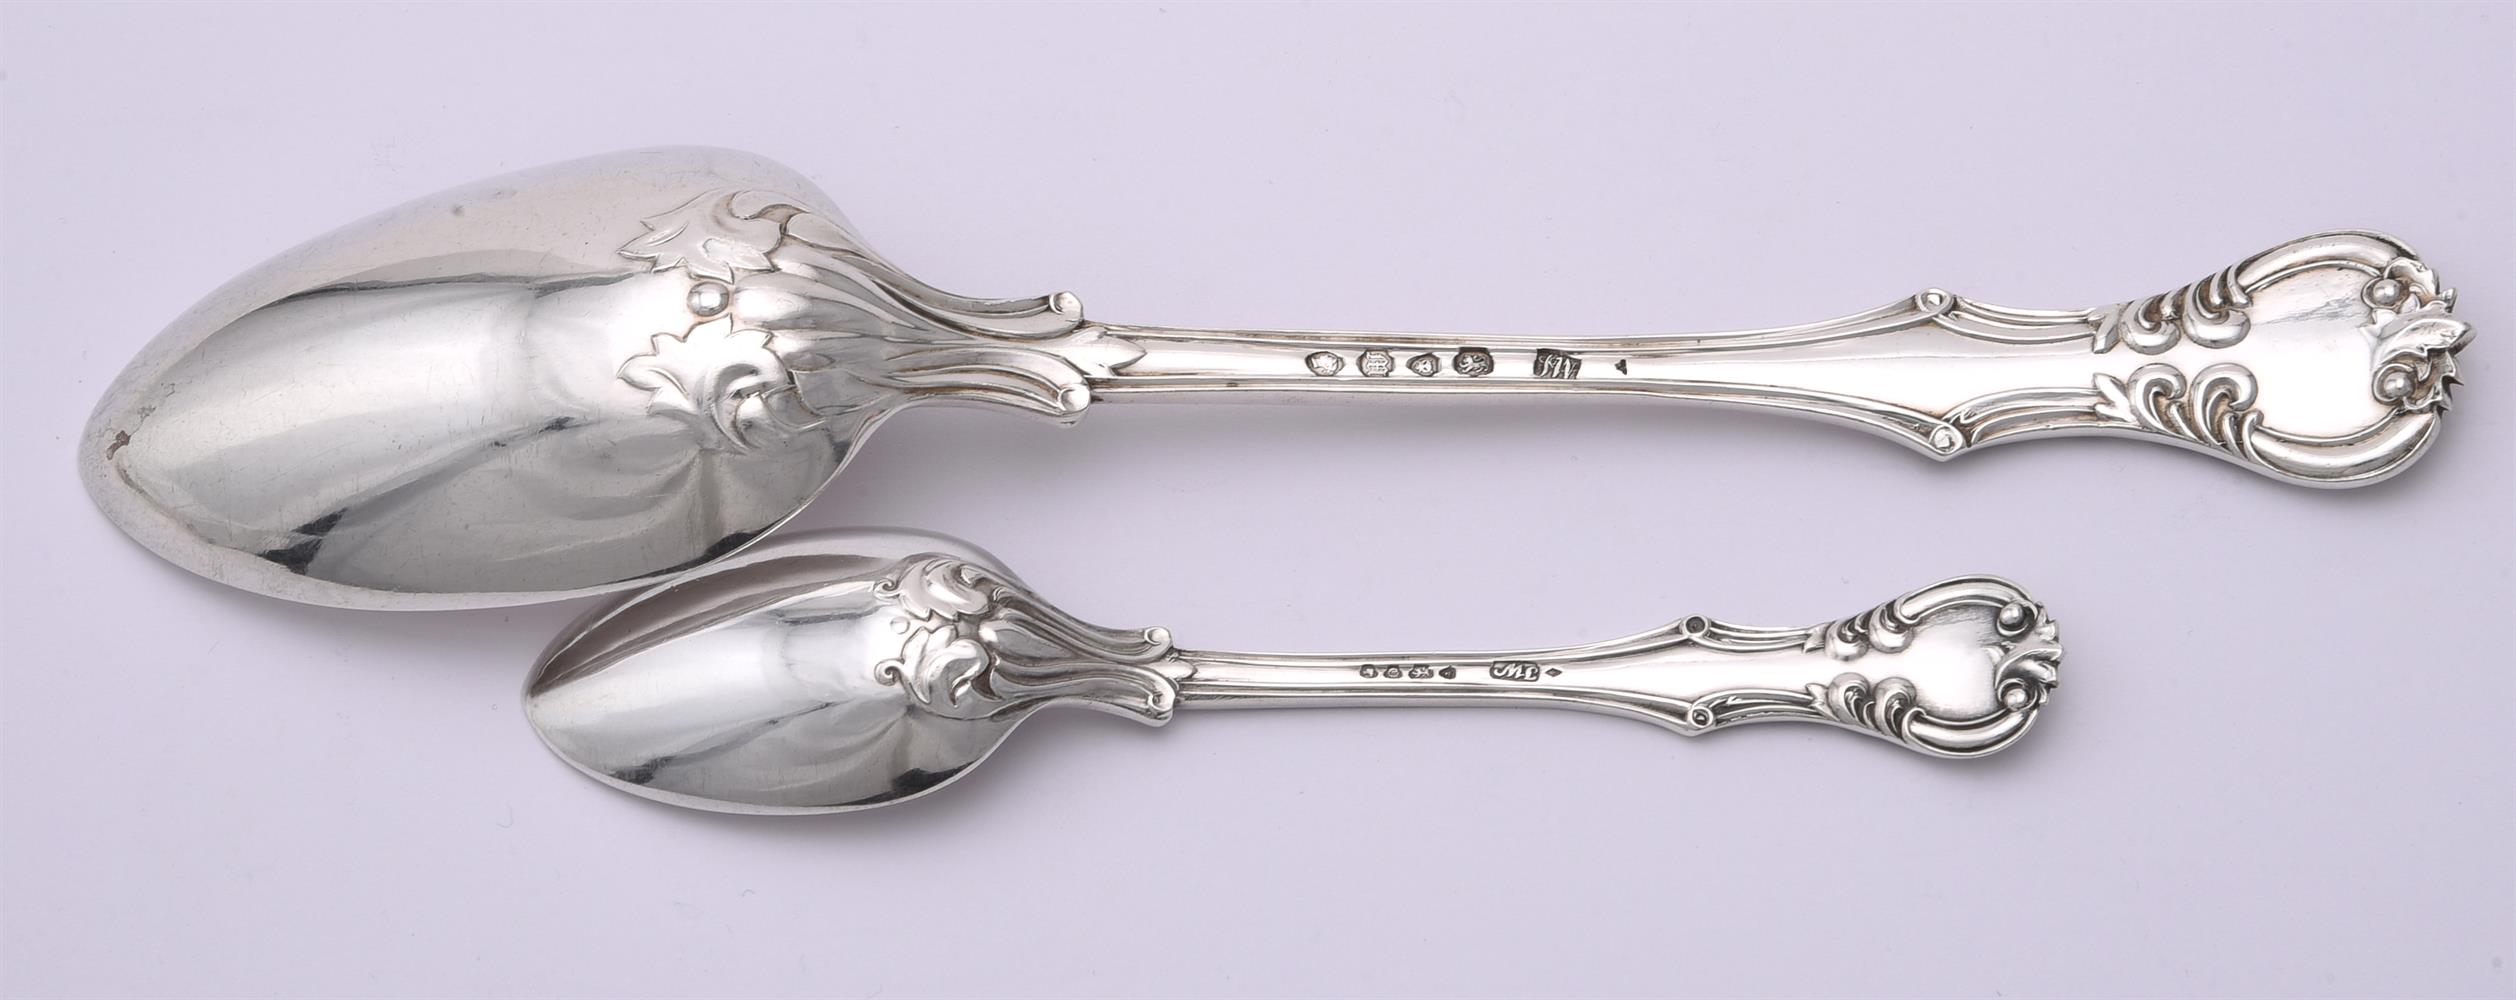 FOUR VICTORIAN SILVER VICTORIA PATTERN TABLE SPOONS AND TWO TEA SPOONS - Image 2 of 3